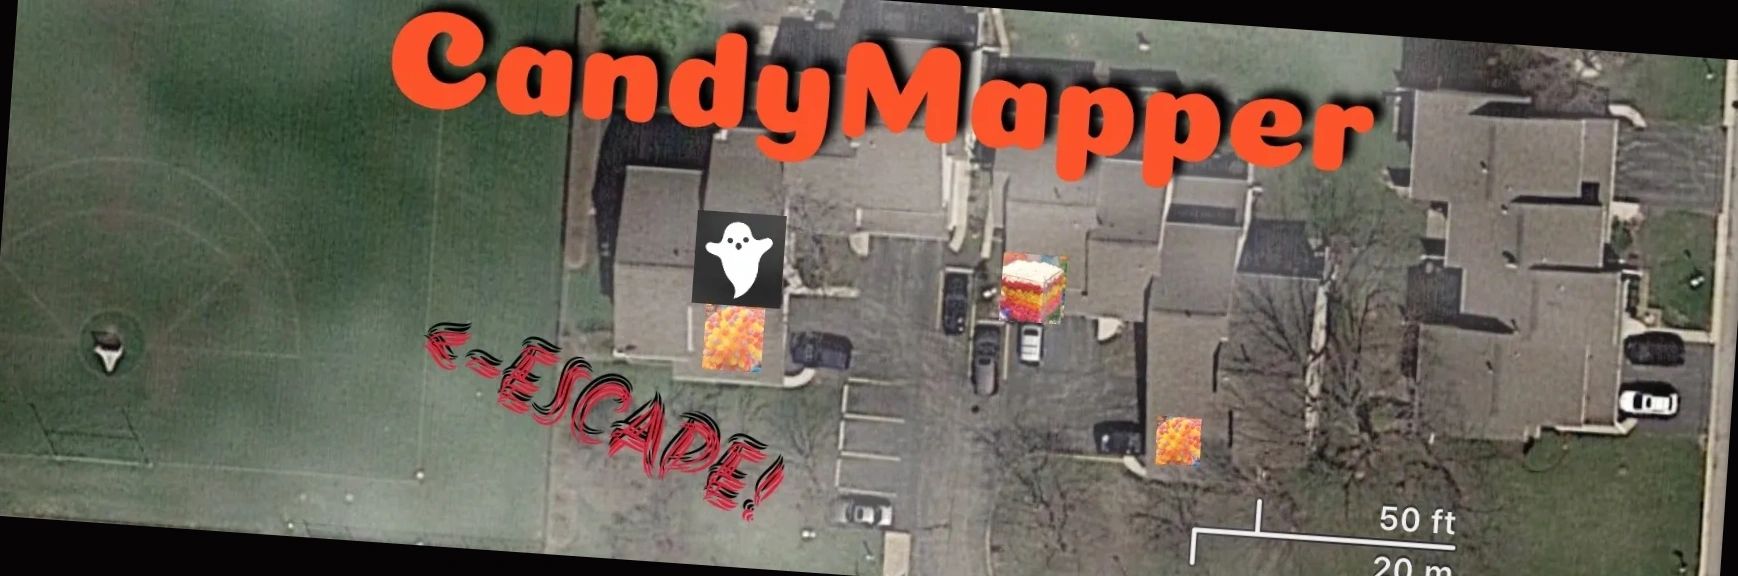 CandyMapper logo offset at an angle indicating this is the broken version.